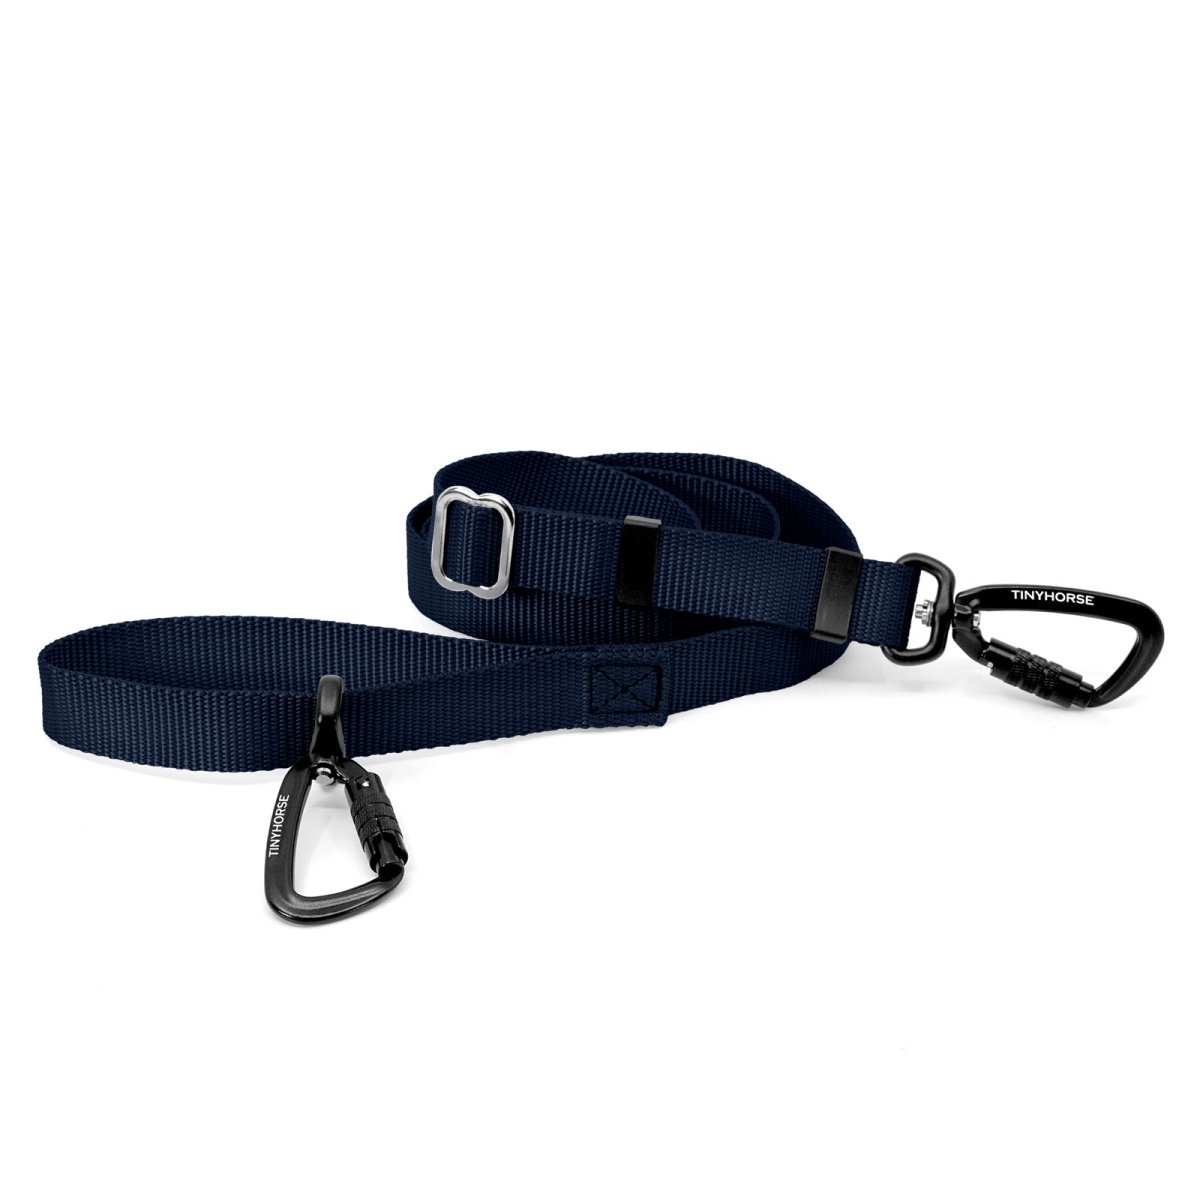 A navy blue-coloured Lead-All Lite Extra with 2 auto-locking carabiners and nylon webbing